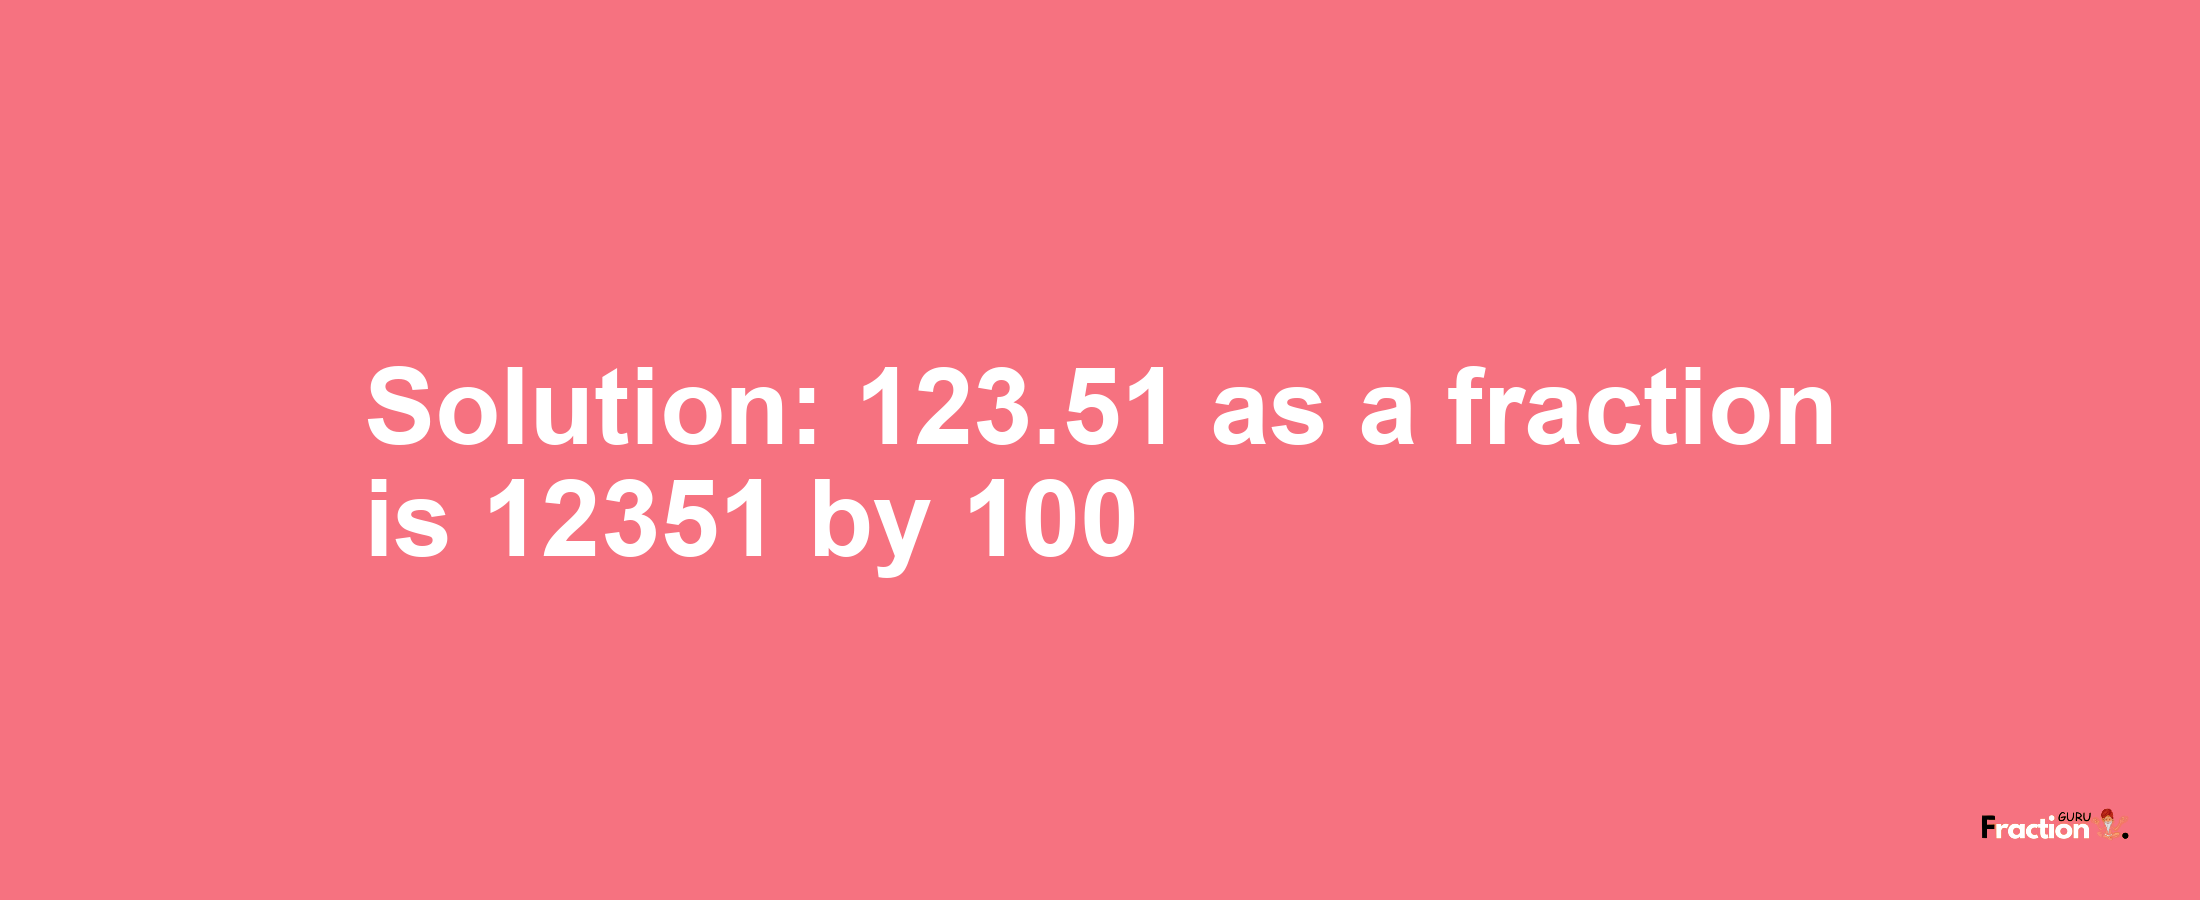 Solution:123.51 as a fraction is 12351/100